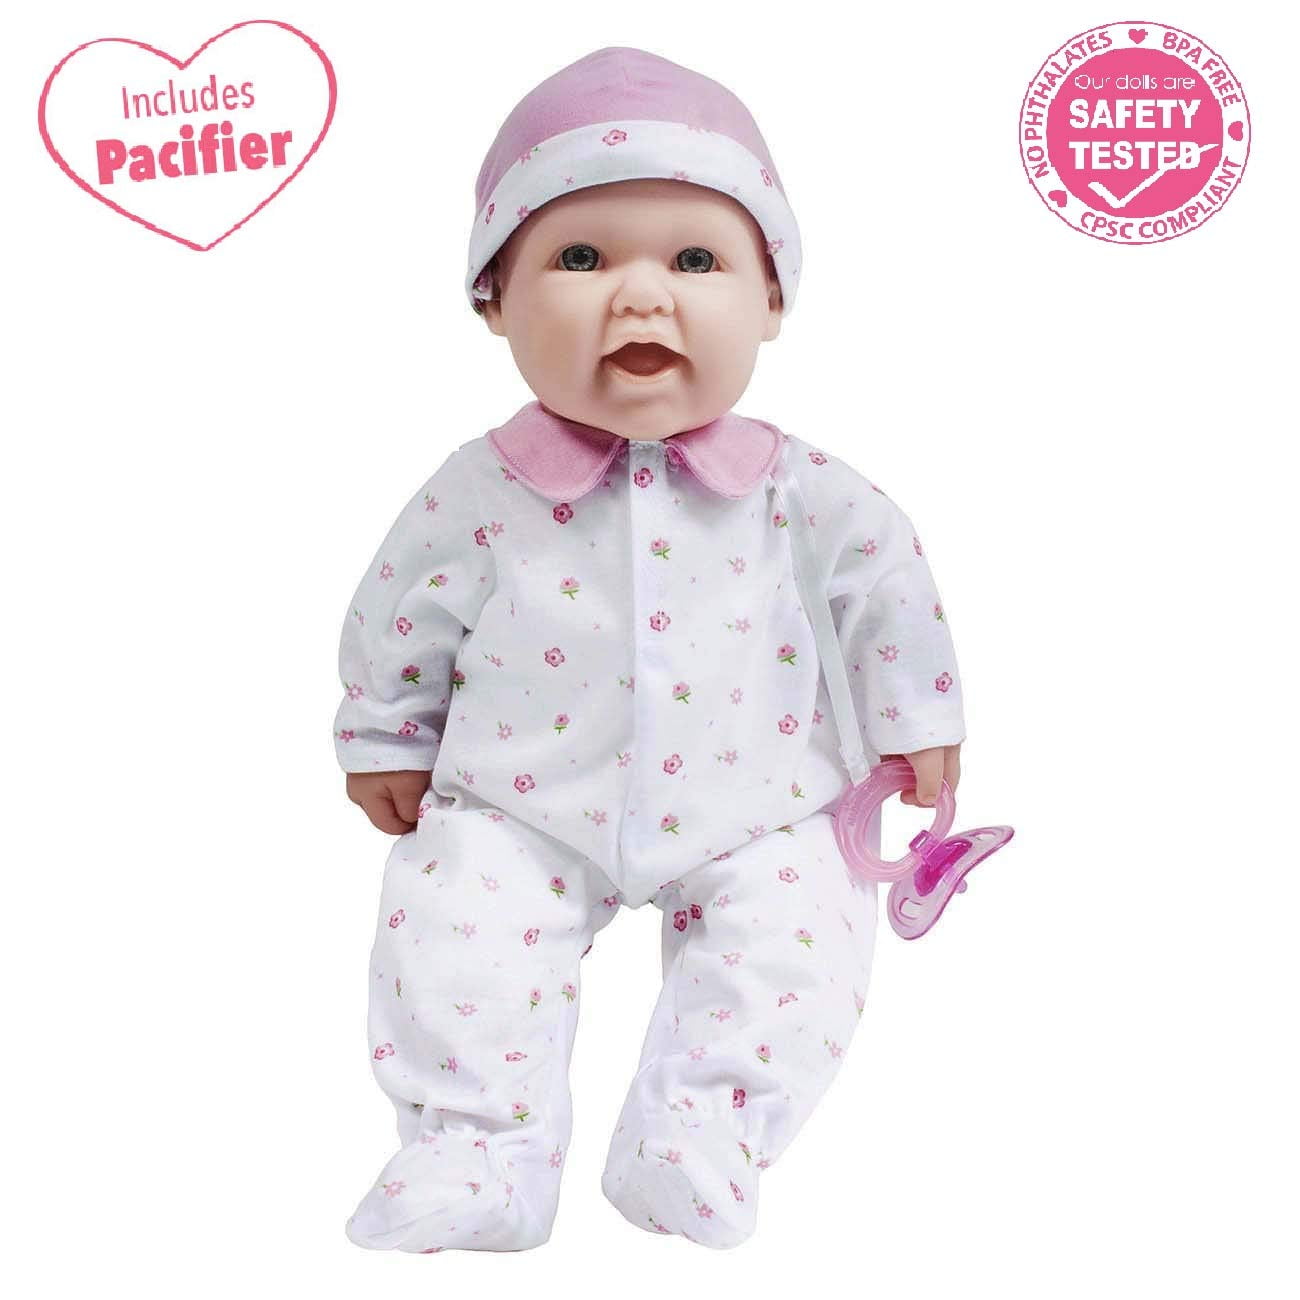 Baby Cuddles Pink 16'' Soft Bodied Toddler Baby Doll Accessory Gift Reborn Doll 